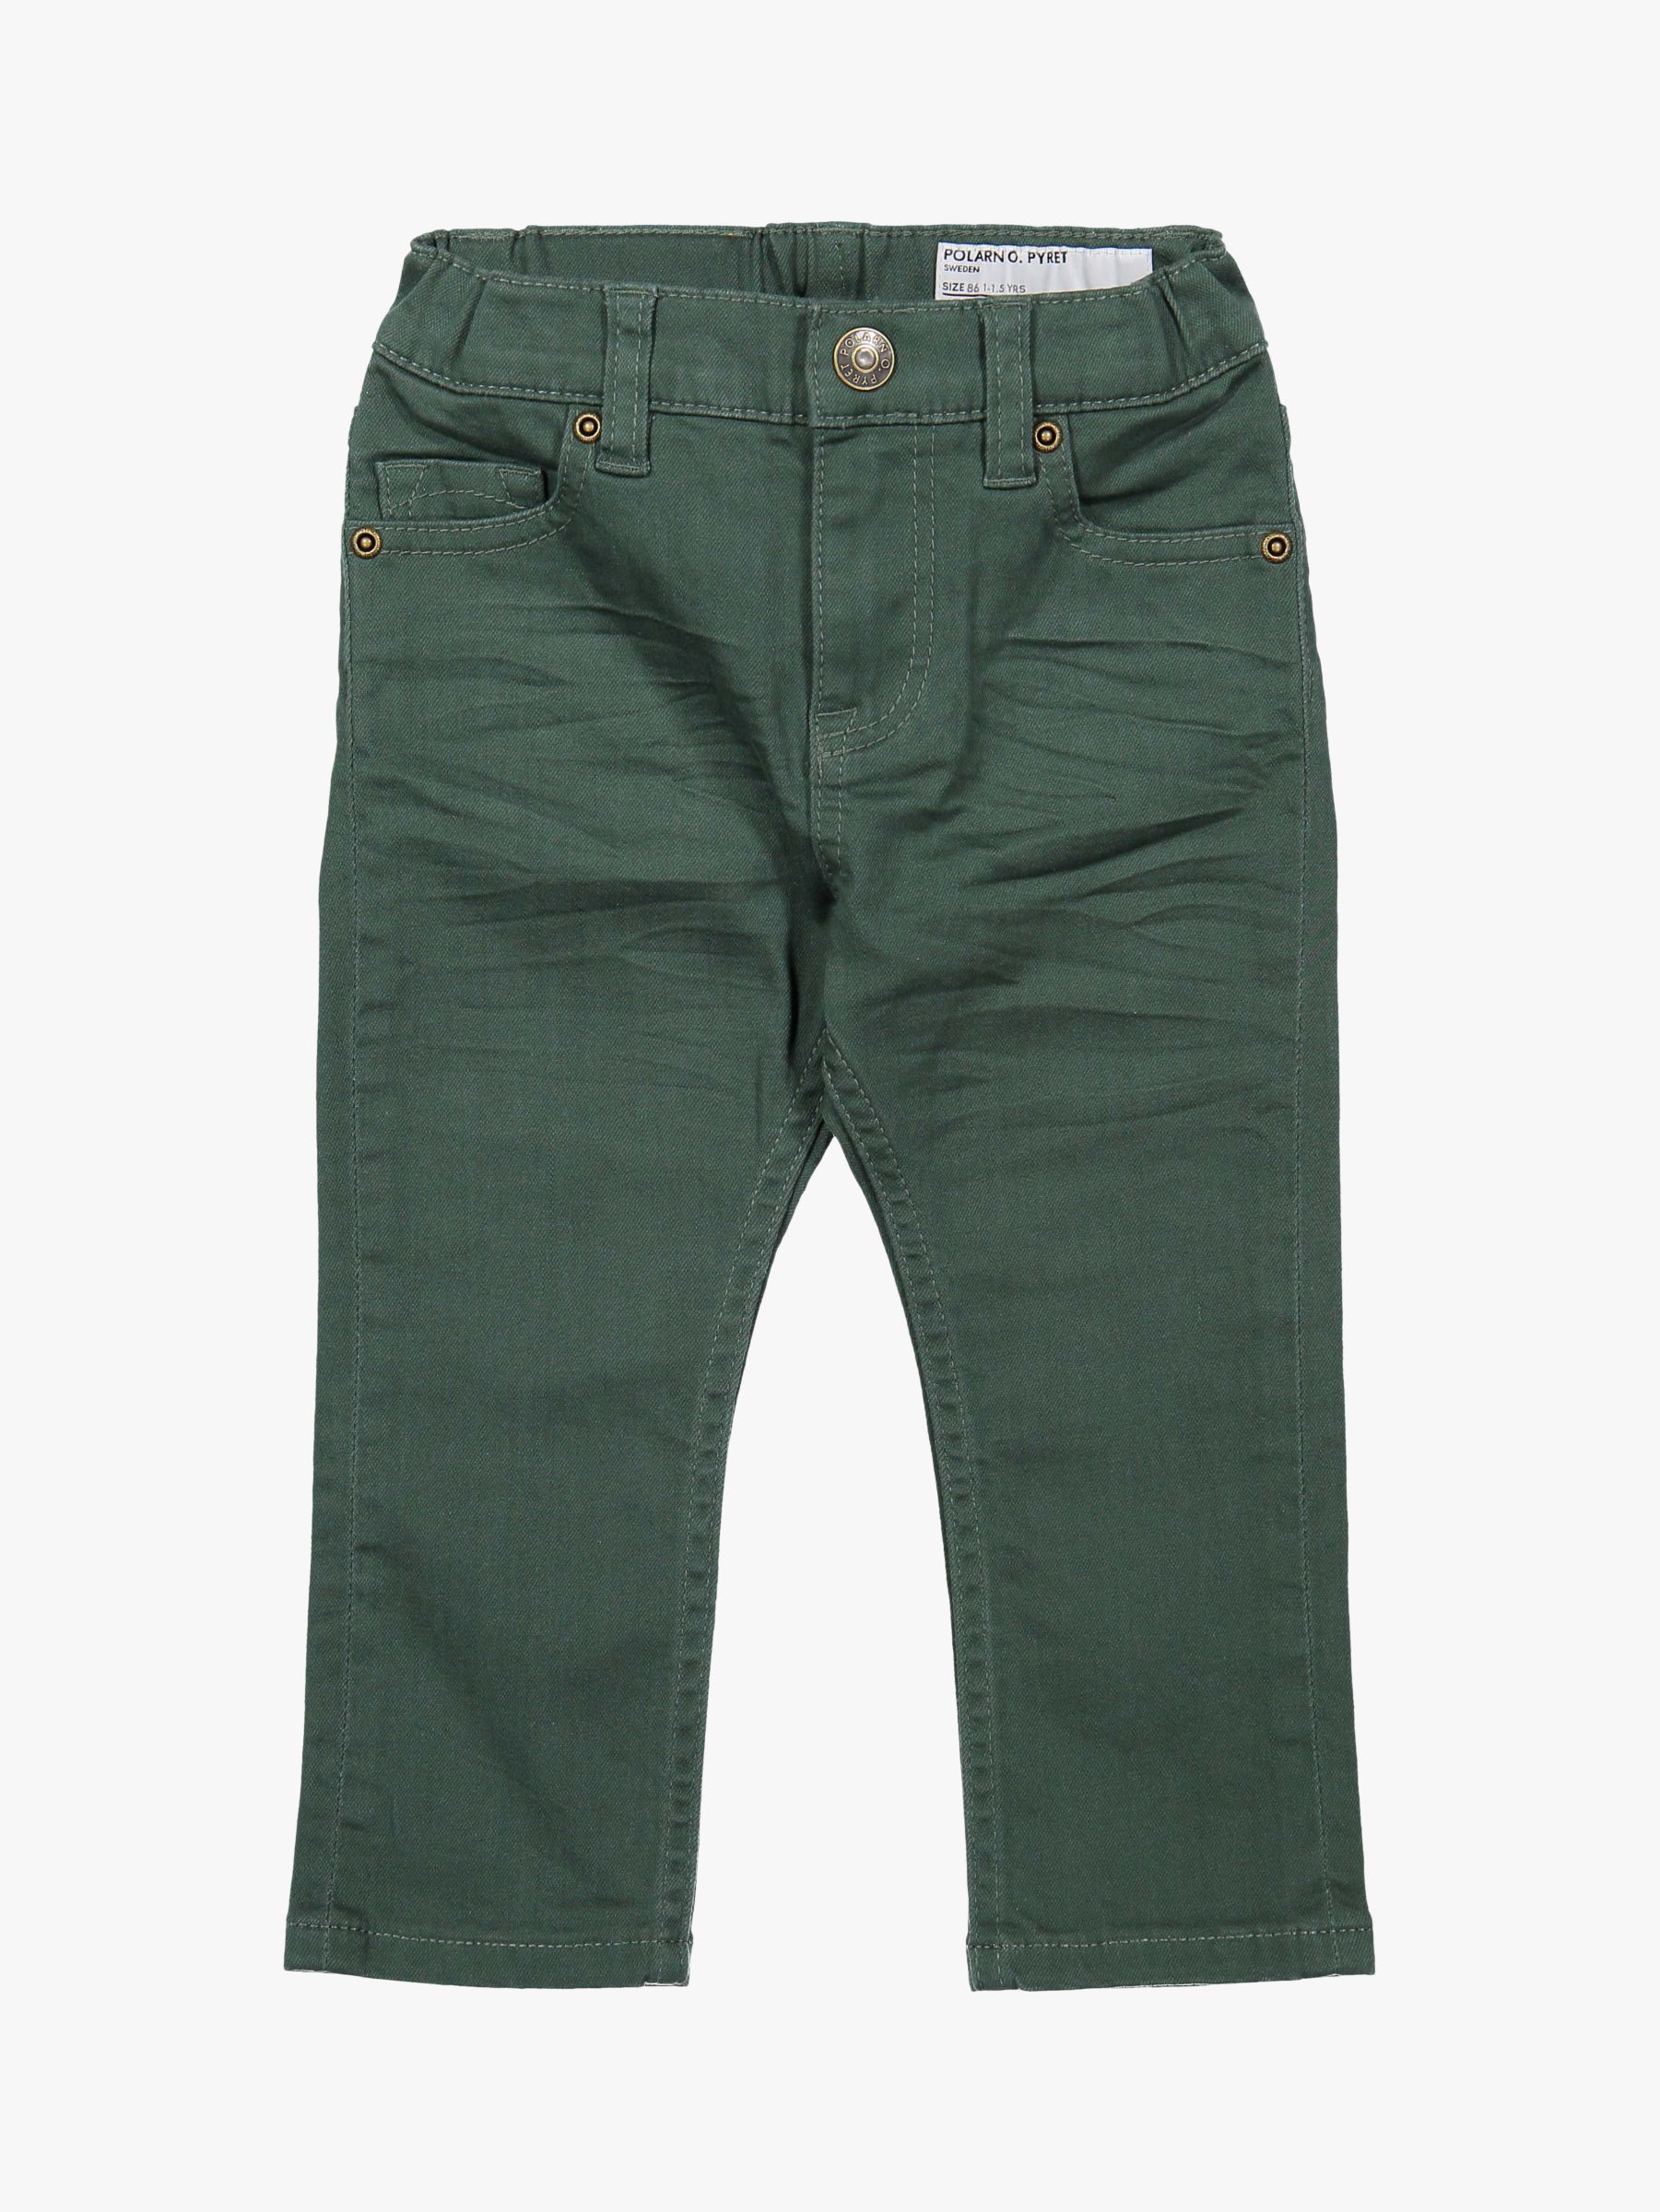 Polarn O. Pyret Baby Twill Jeans, Green